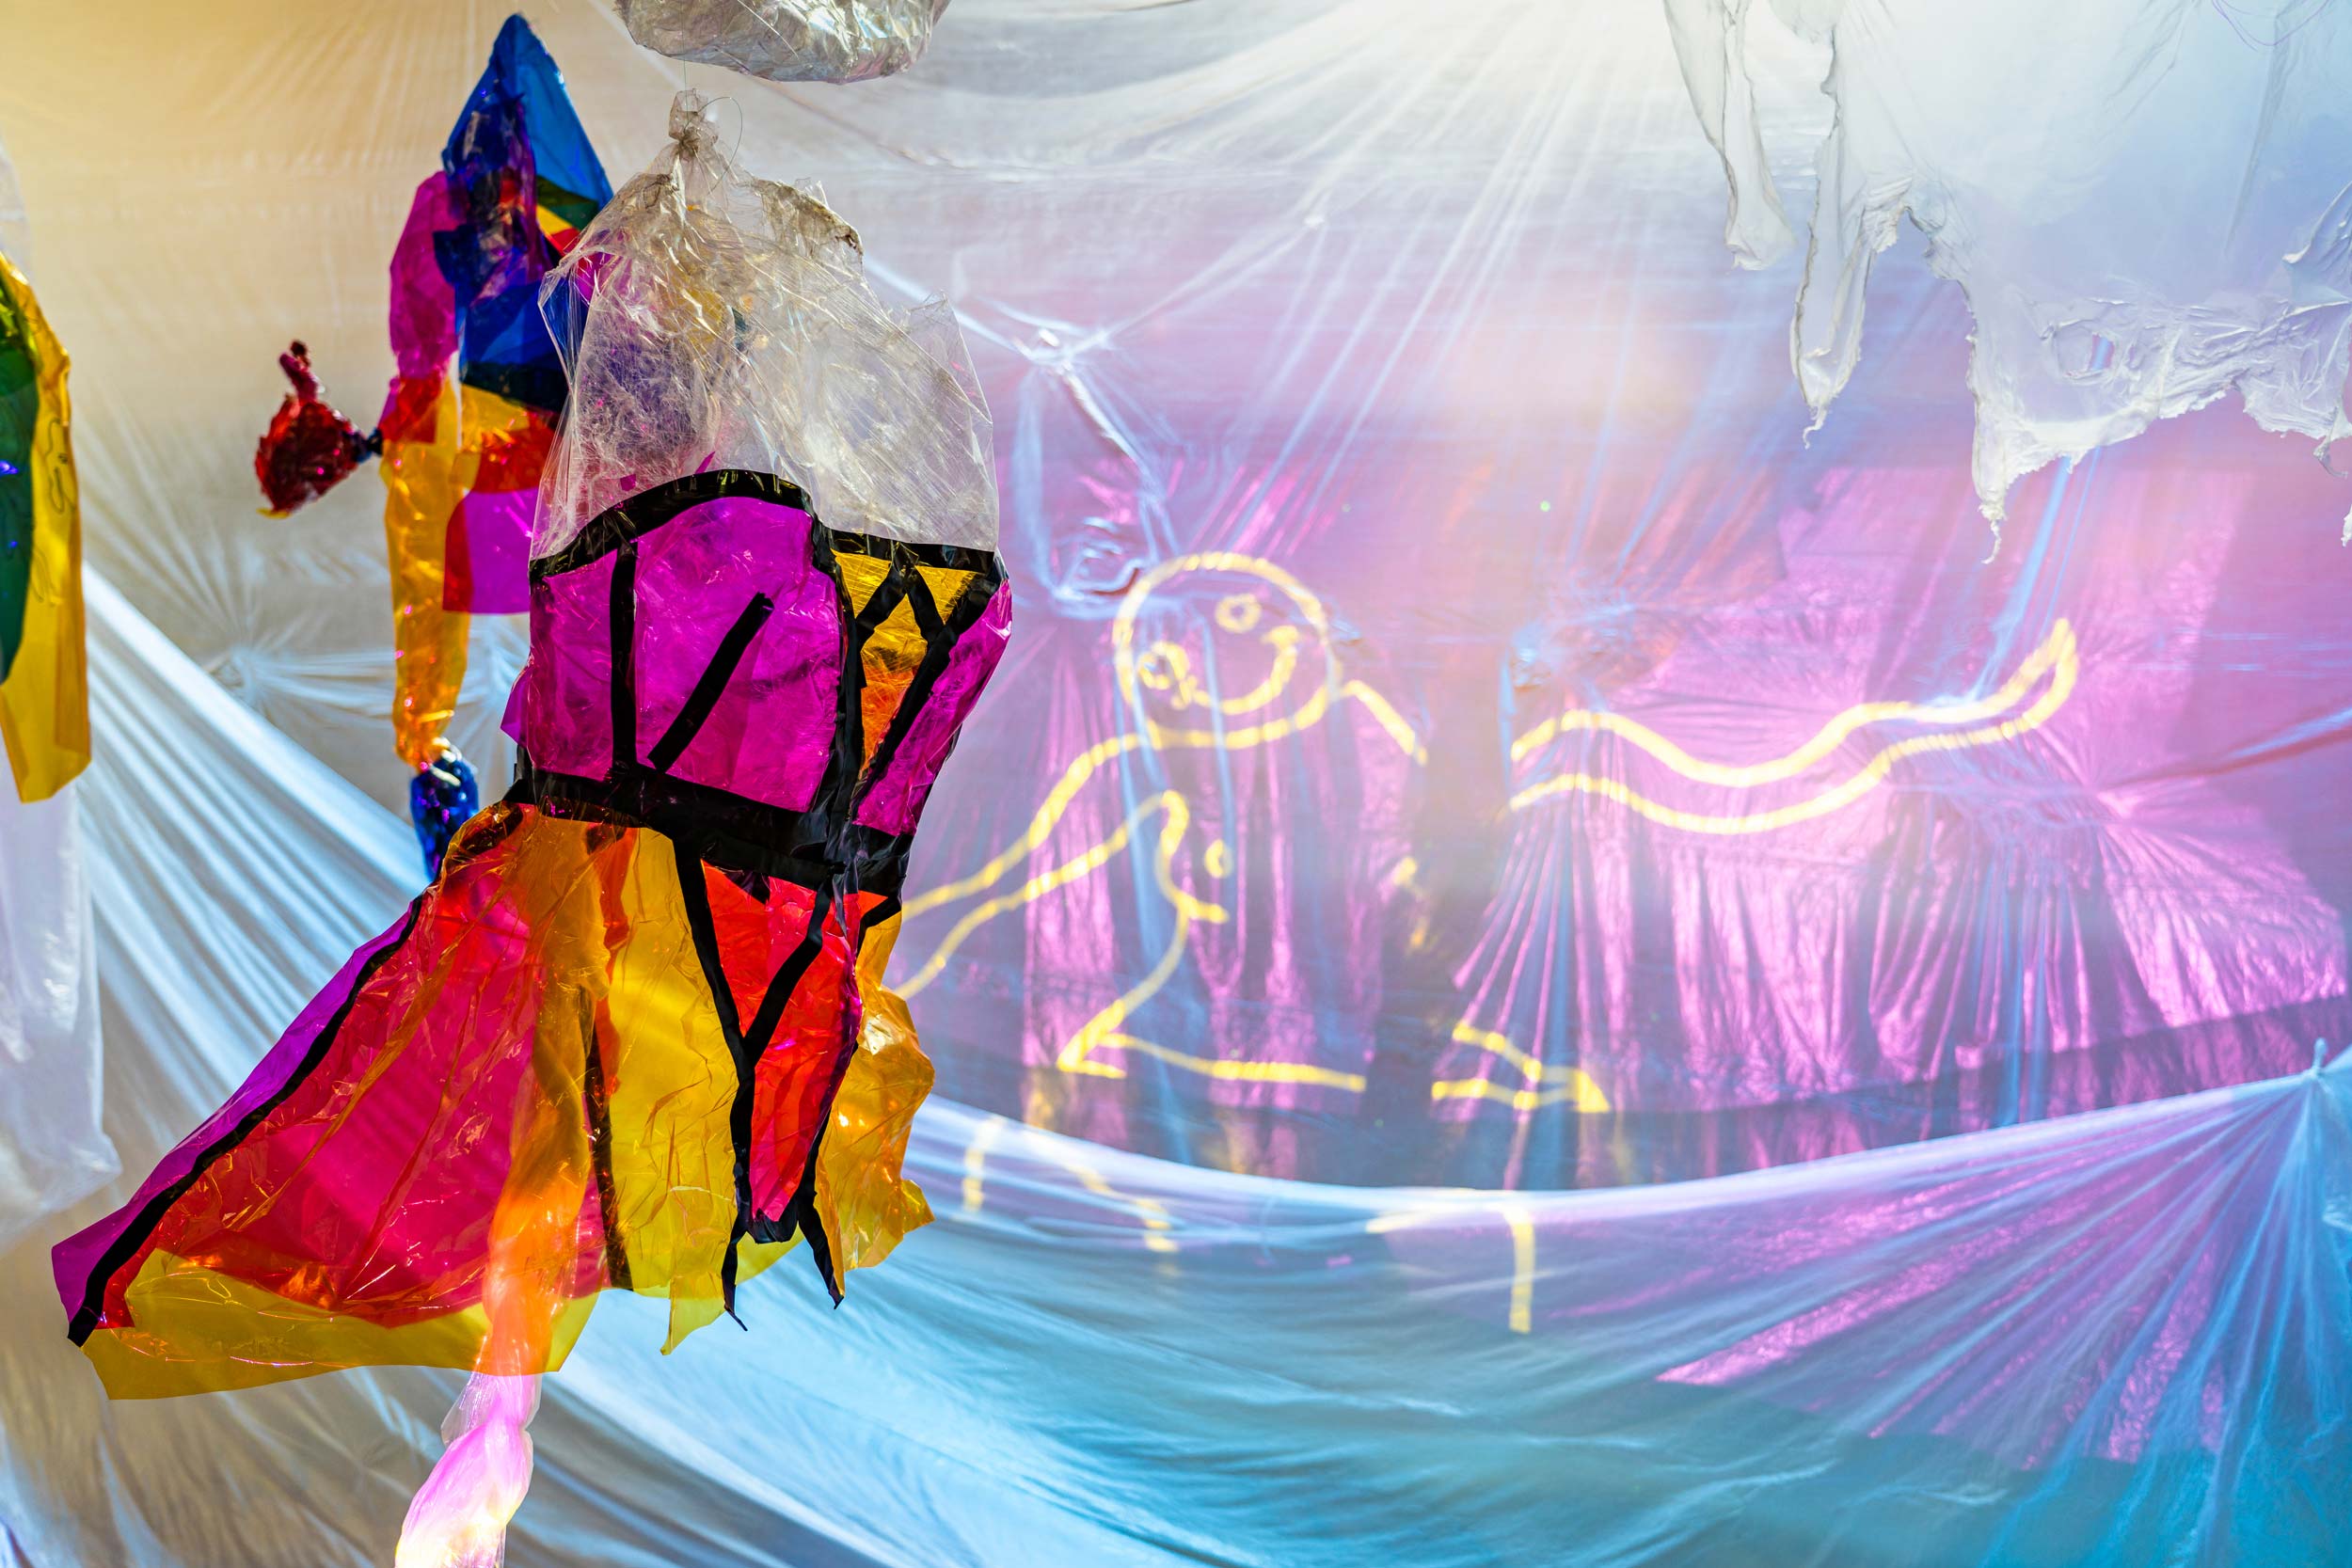 Installation featuring pink and yellow transparent plastic corset/dree hanging. An animation of a female character drawn in yellow is projected onto the purple and blue plastic background.